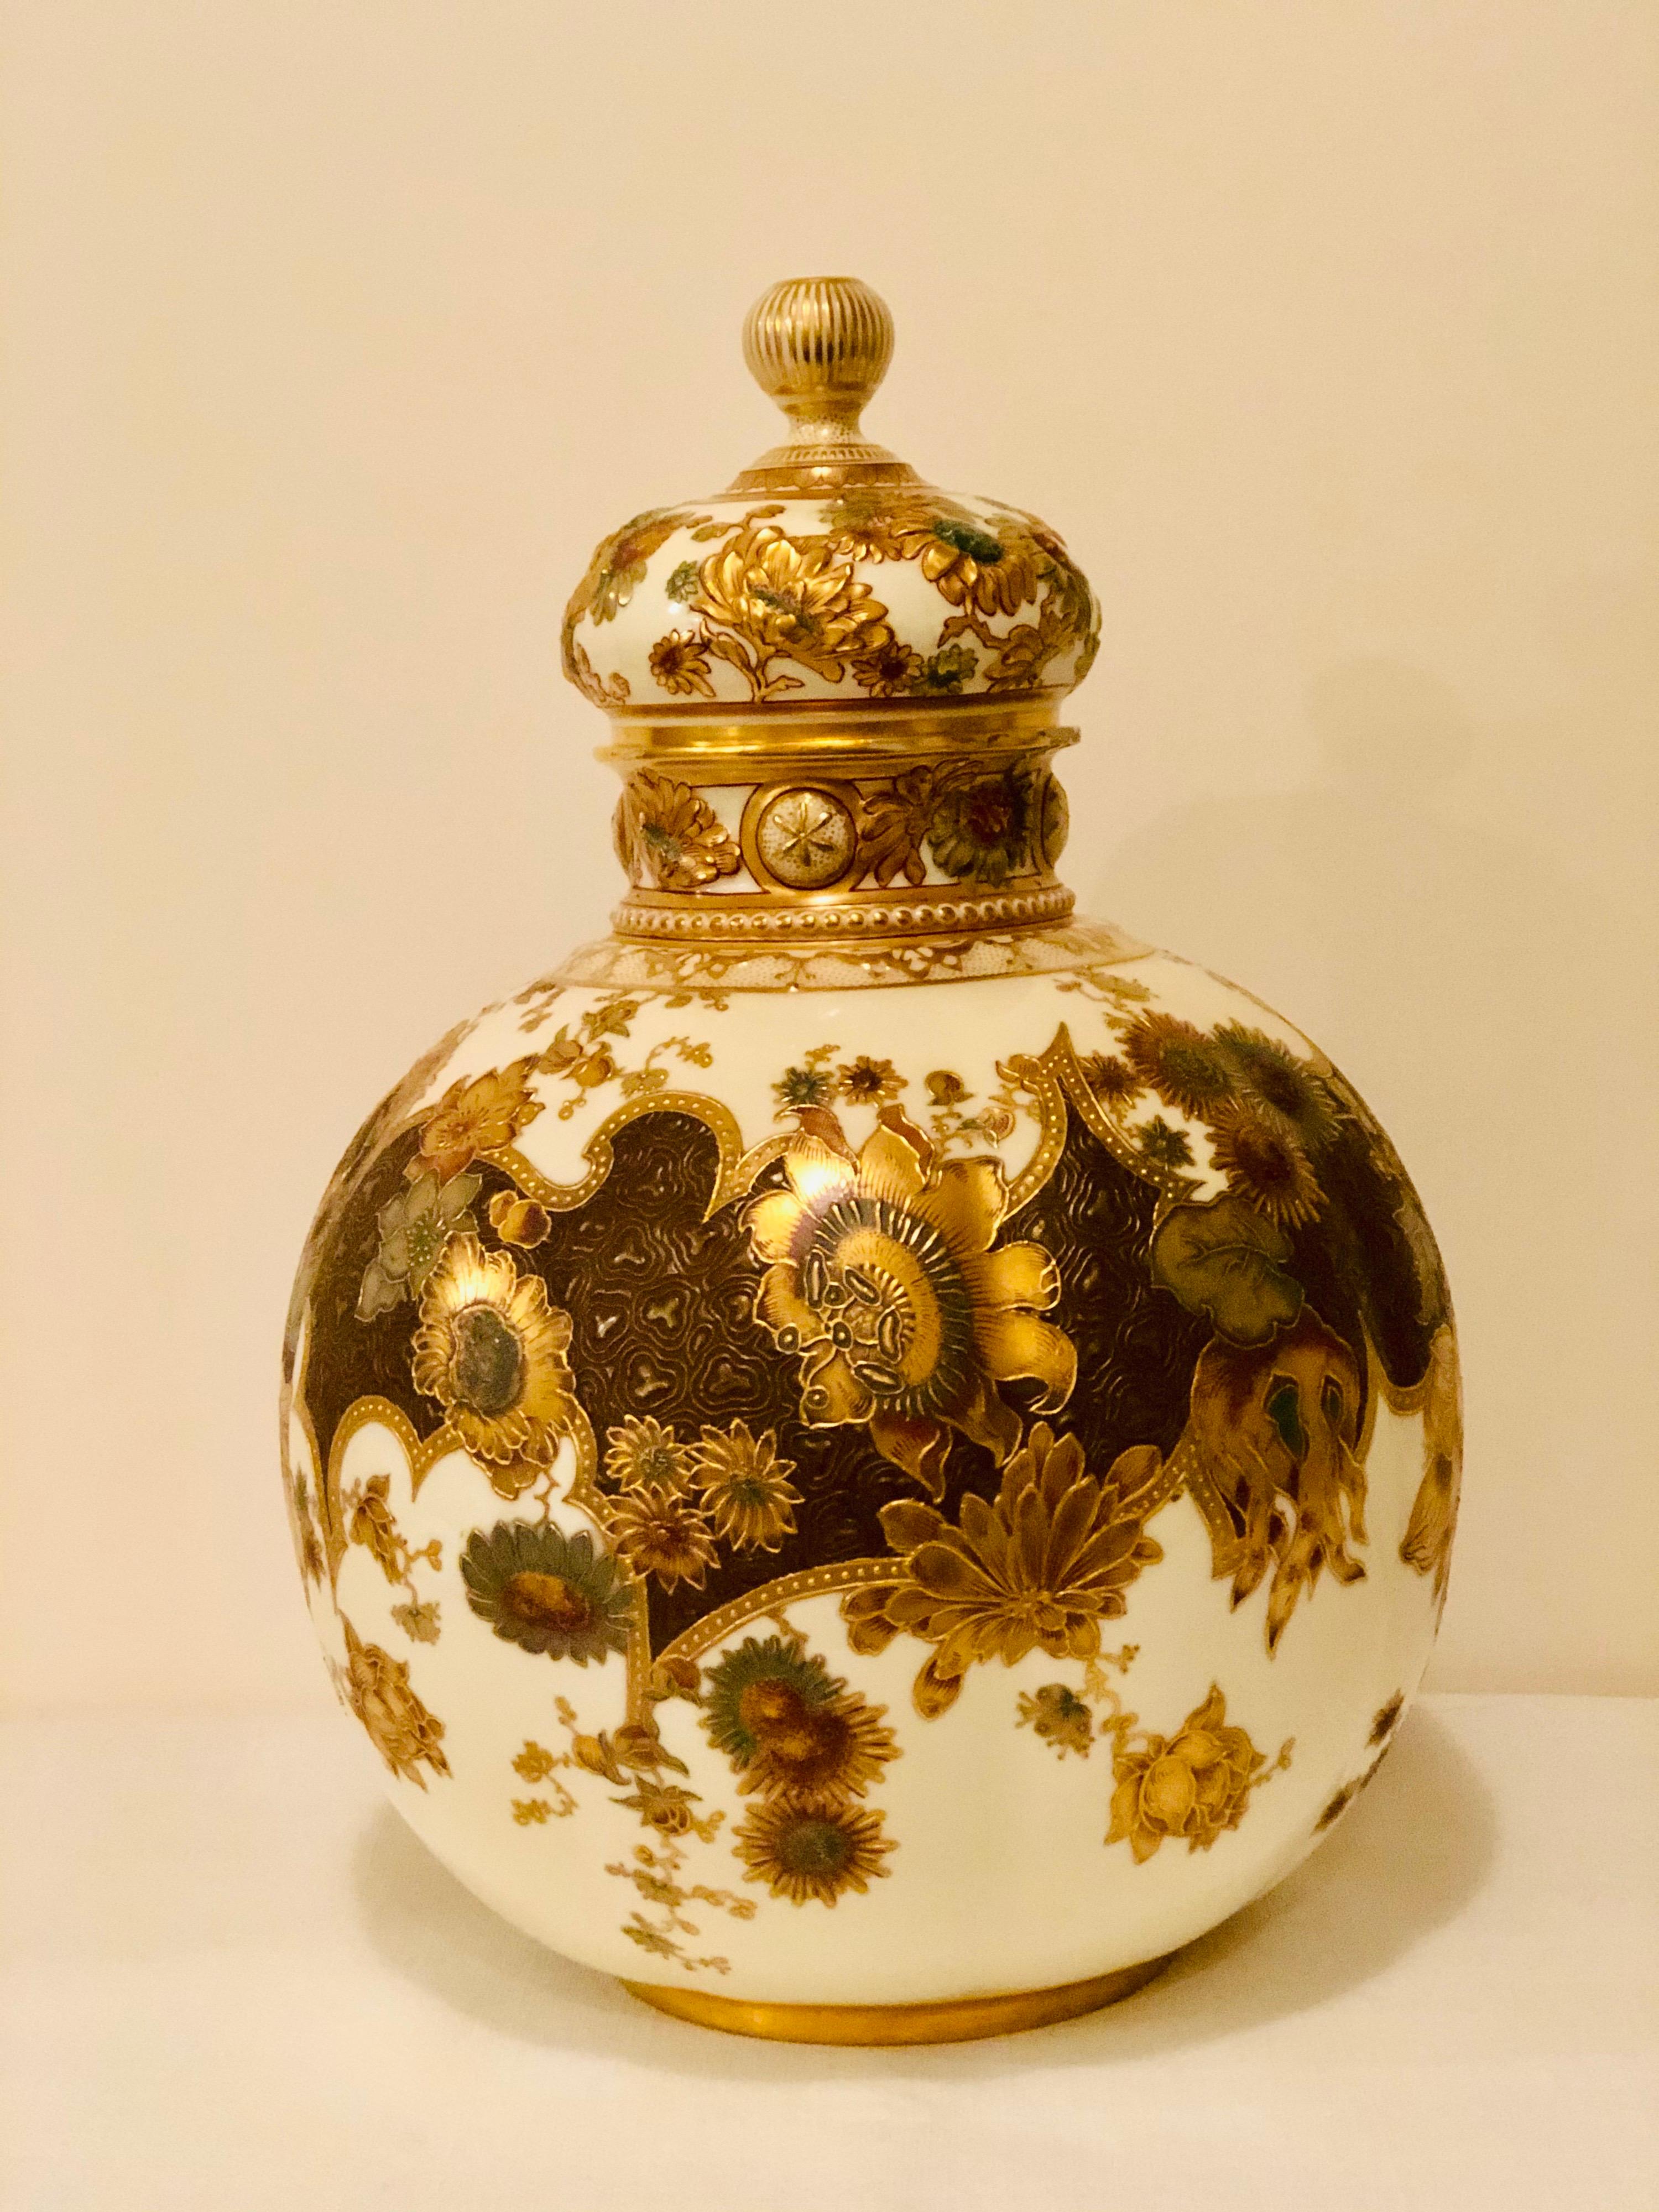 Porcelain Museum Quality Royal Crown Derby Urn with Raised Gold and Flower Decorations